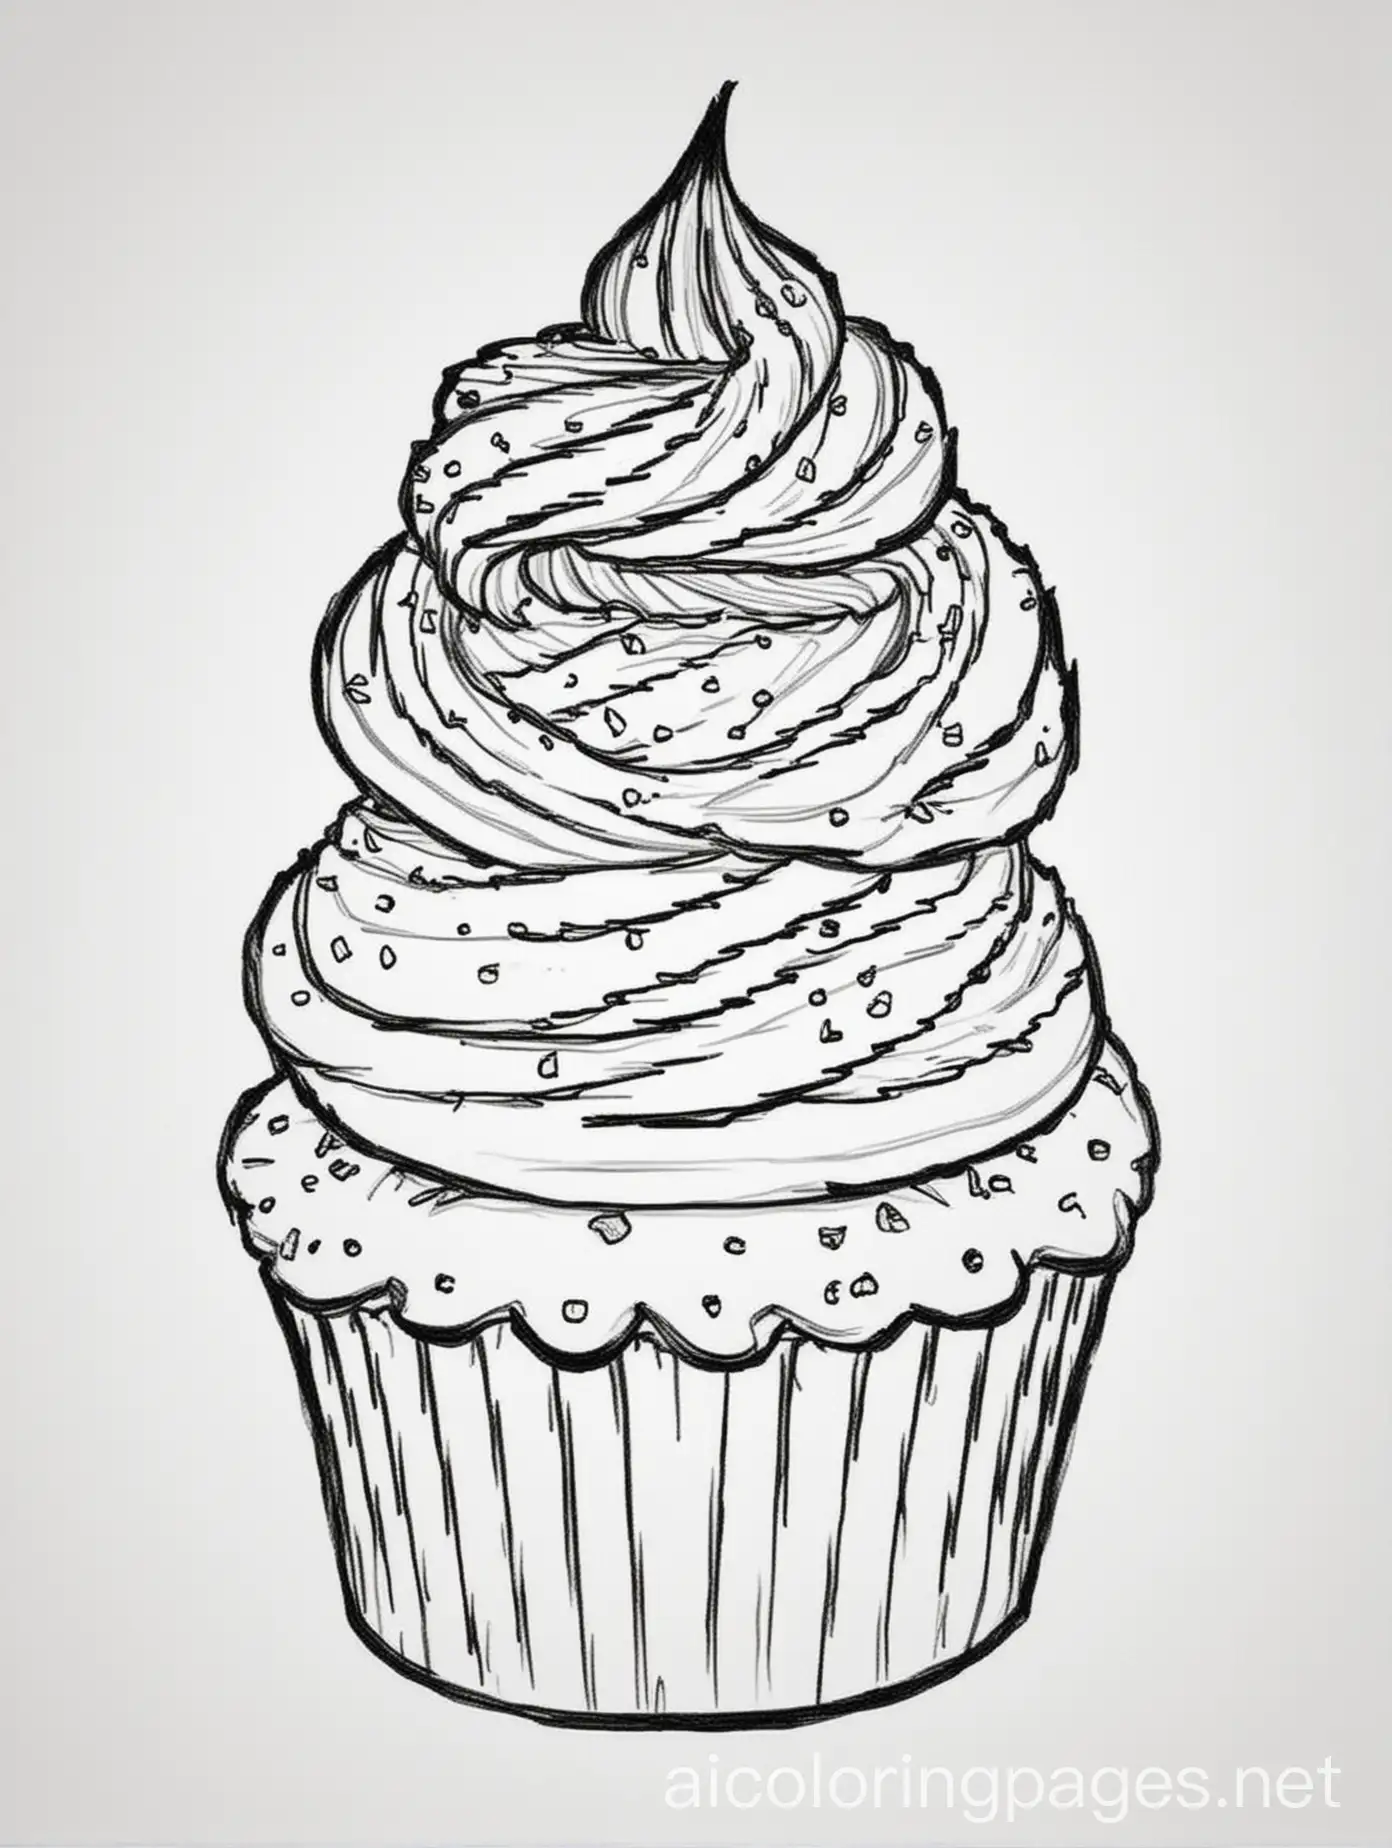 Simple-Cupcake-Coloring-Page-for-Kids-Black-and-White-Line-Art-on-White-Background